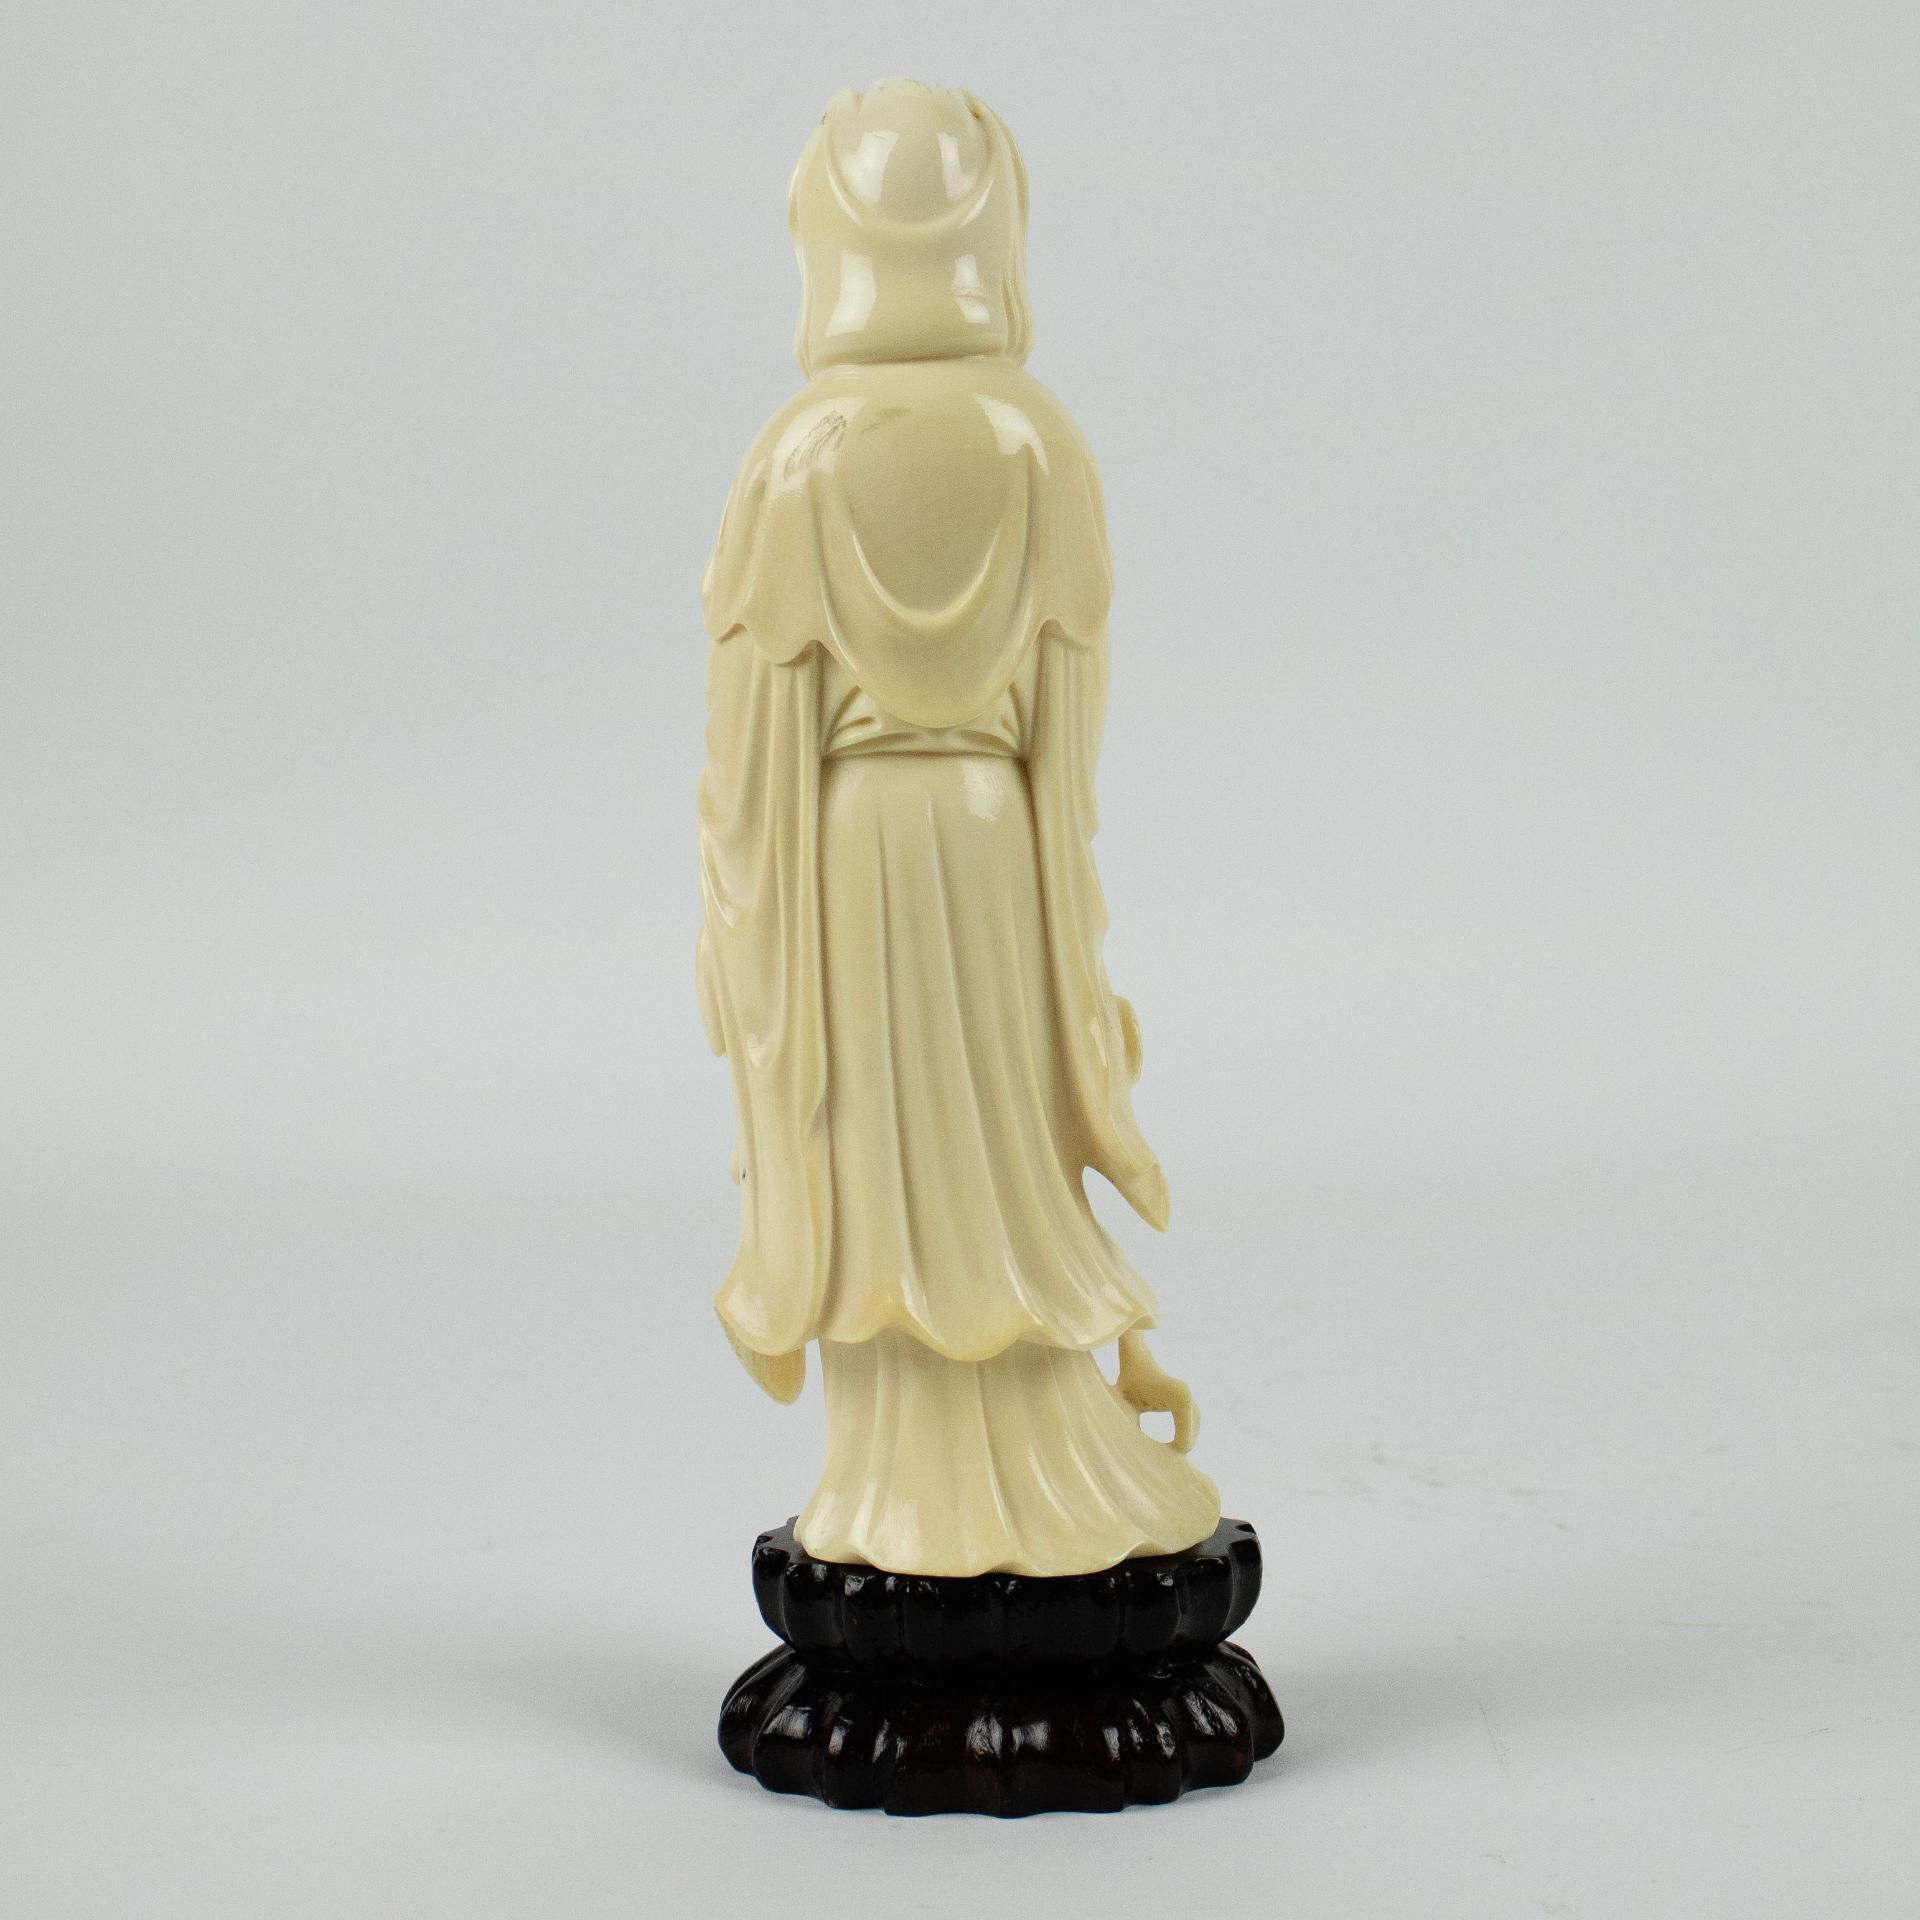 Chinese carved elephant ivory figure of Guanyin - Image 3 of 4